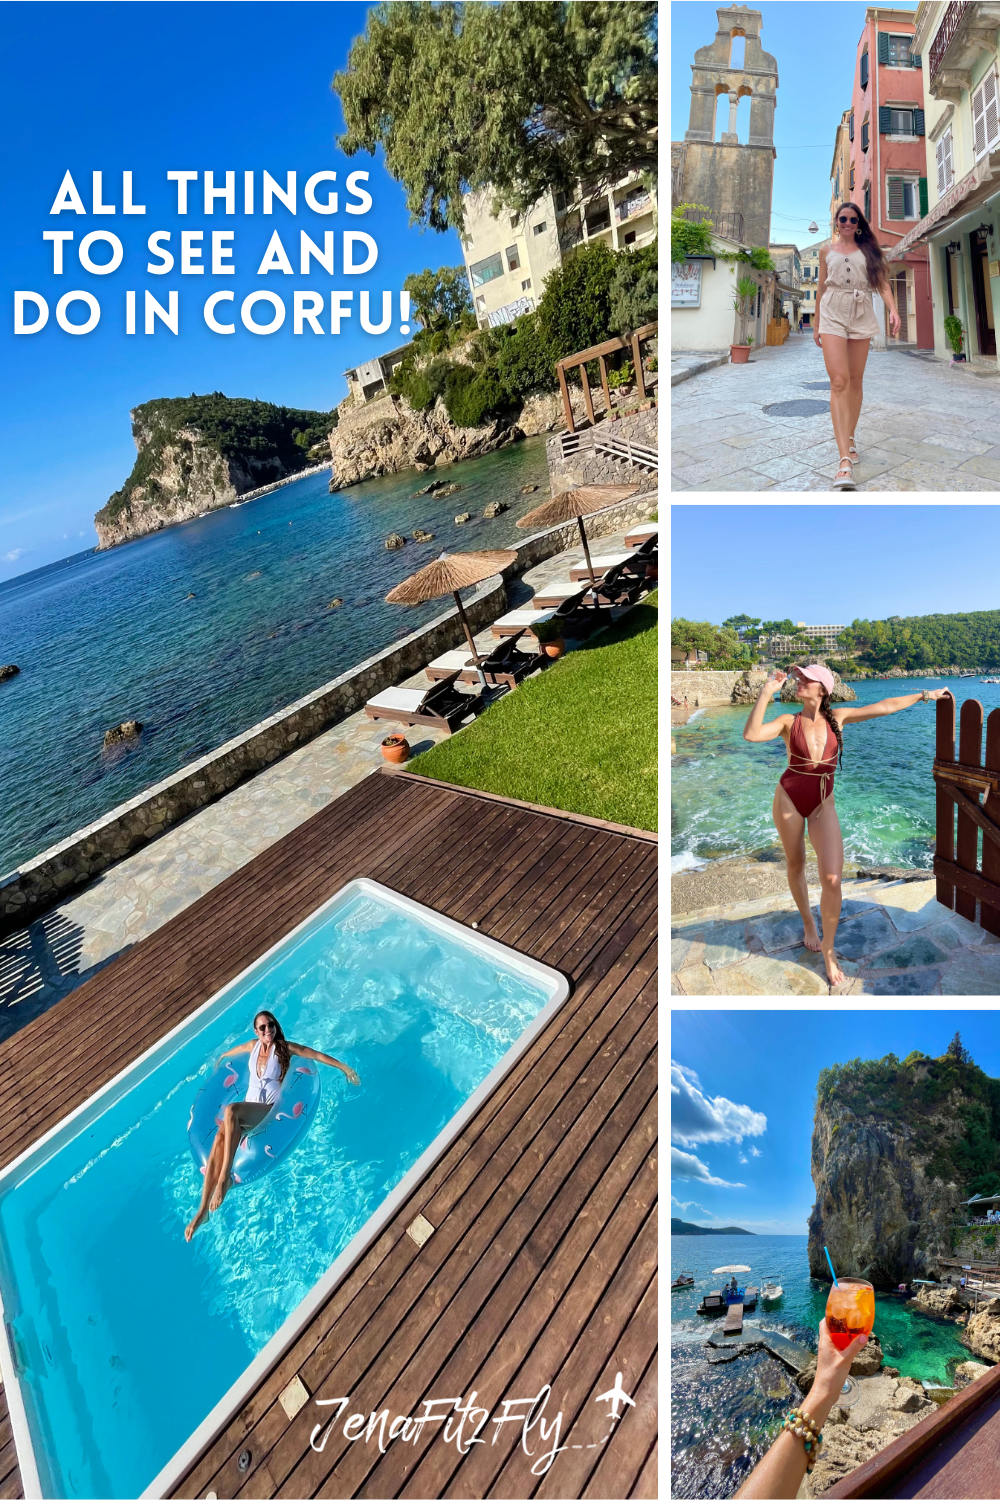 Where to stay and what to do in Corfu, Greece! Corfu is filled with incredible architecture, unreal beaches and pristine water. Here's everything you need to know, and where to go, to make the best of your Corfu experience!